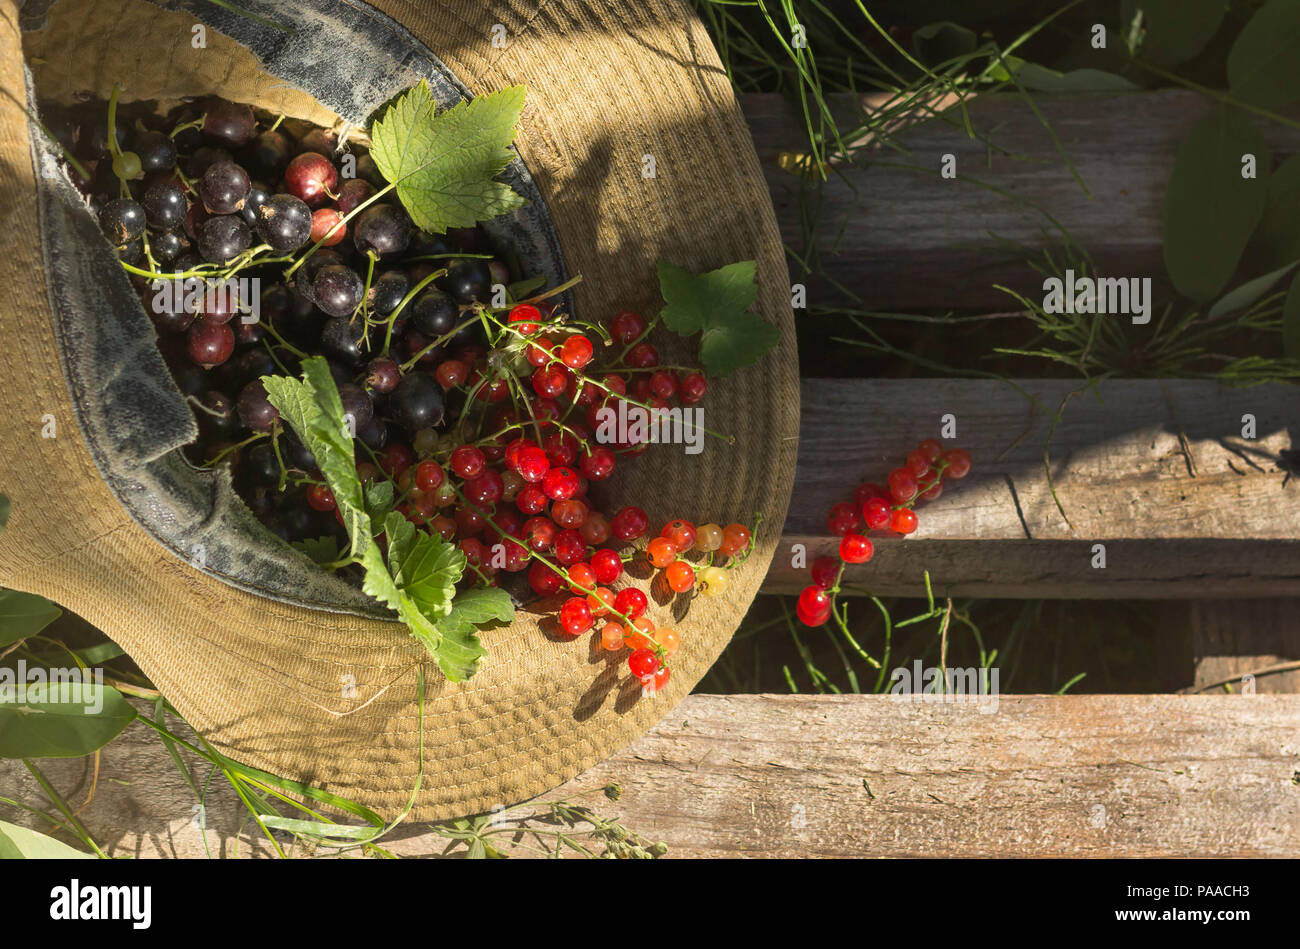 Ripe juicy currant berries lie in a man's hat on old boards Stock Photo